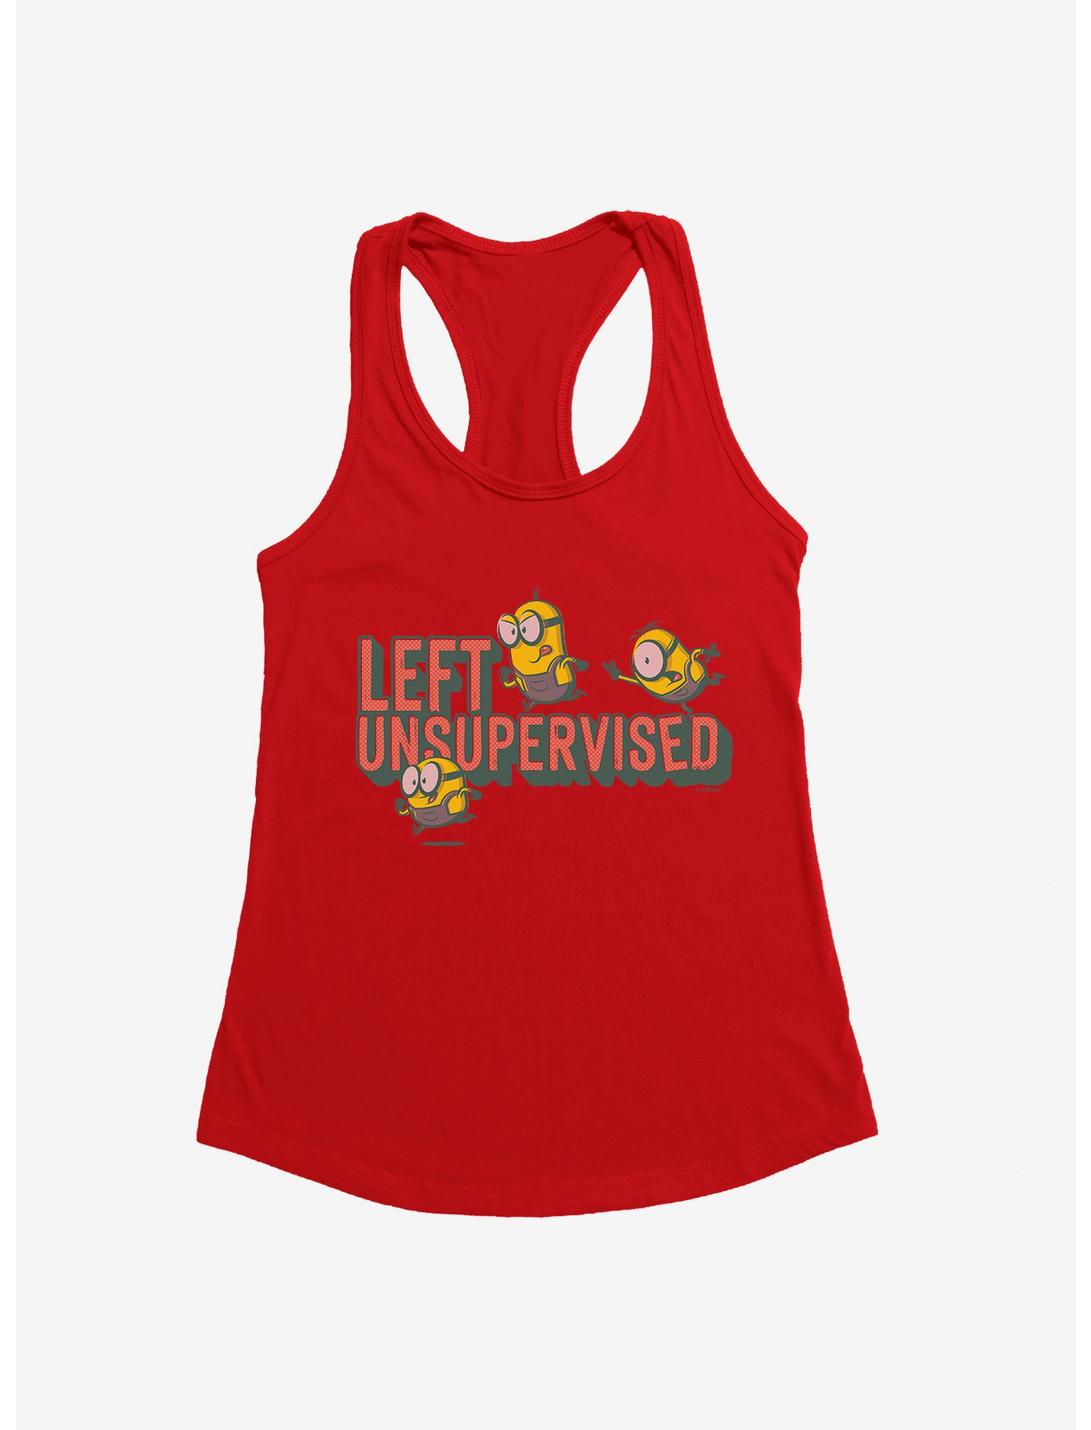 Minions Bob's Left Unsupervised Womens Tank Top, RED, hi-res